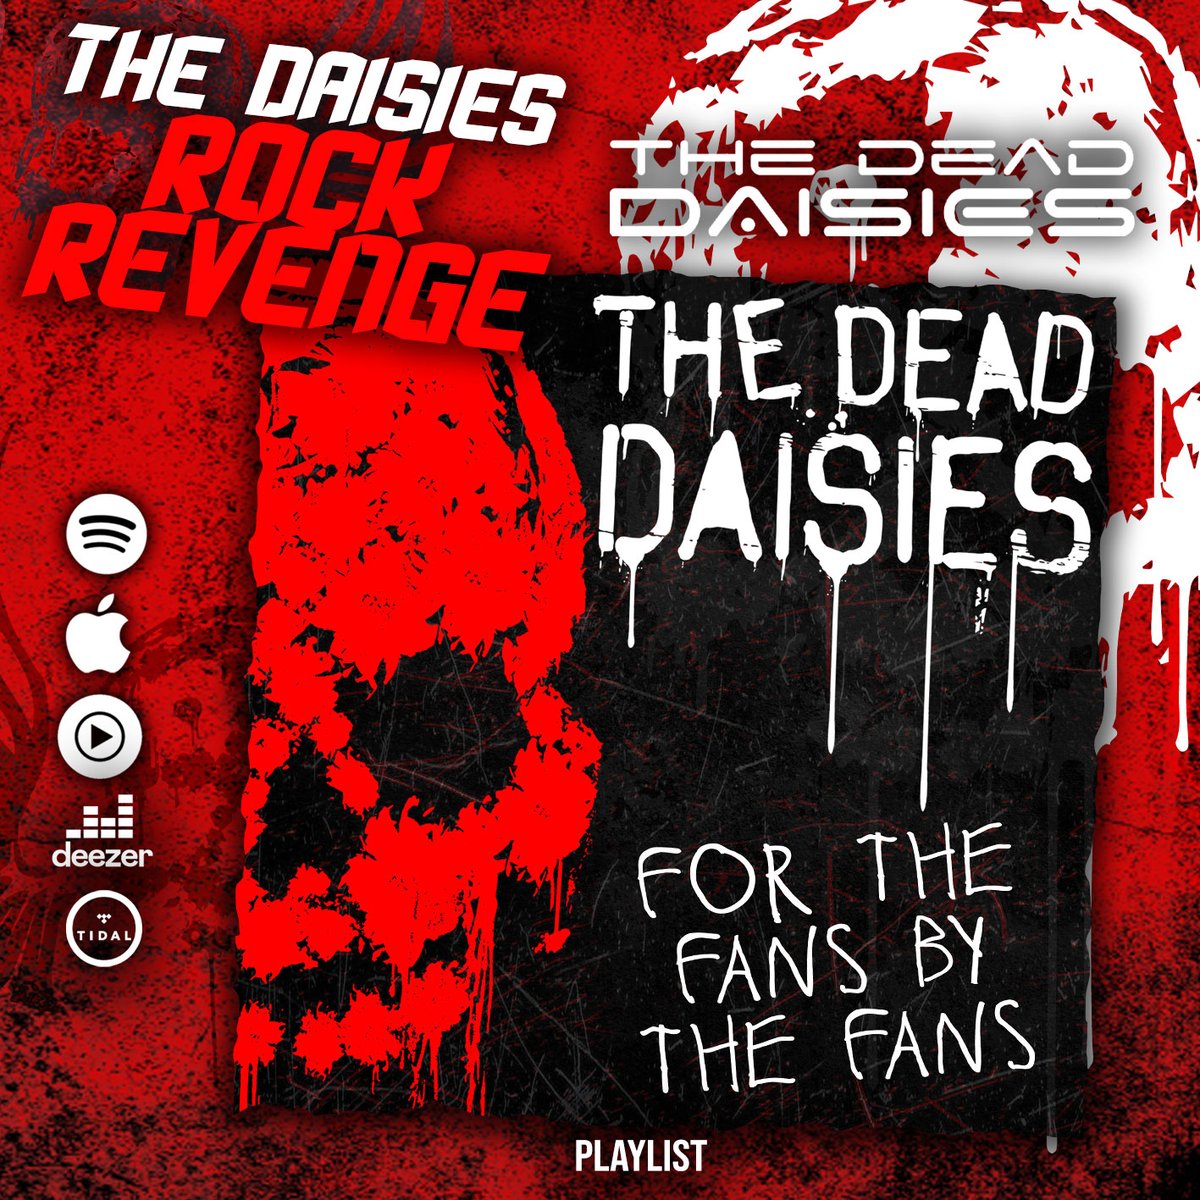 Well the votes are in…..😎
Check out the “For The Fans By The Fans” playlist as voted by you guys!⚡⚡
Stream away and turn it up nice & loud!🚀🚀
Have a rockin' weekend everyone!🤘🤘

thedeaddaisies.com/daisies-rock-r…

#TheDeadDaisies #TheDaisiesRockRevenge #ForTheFansByTheFans #Playlist